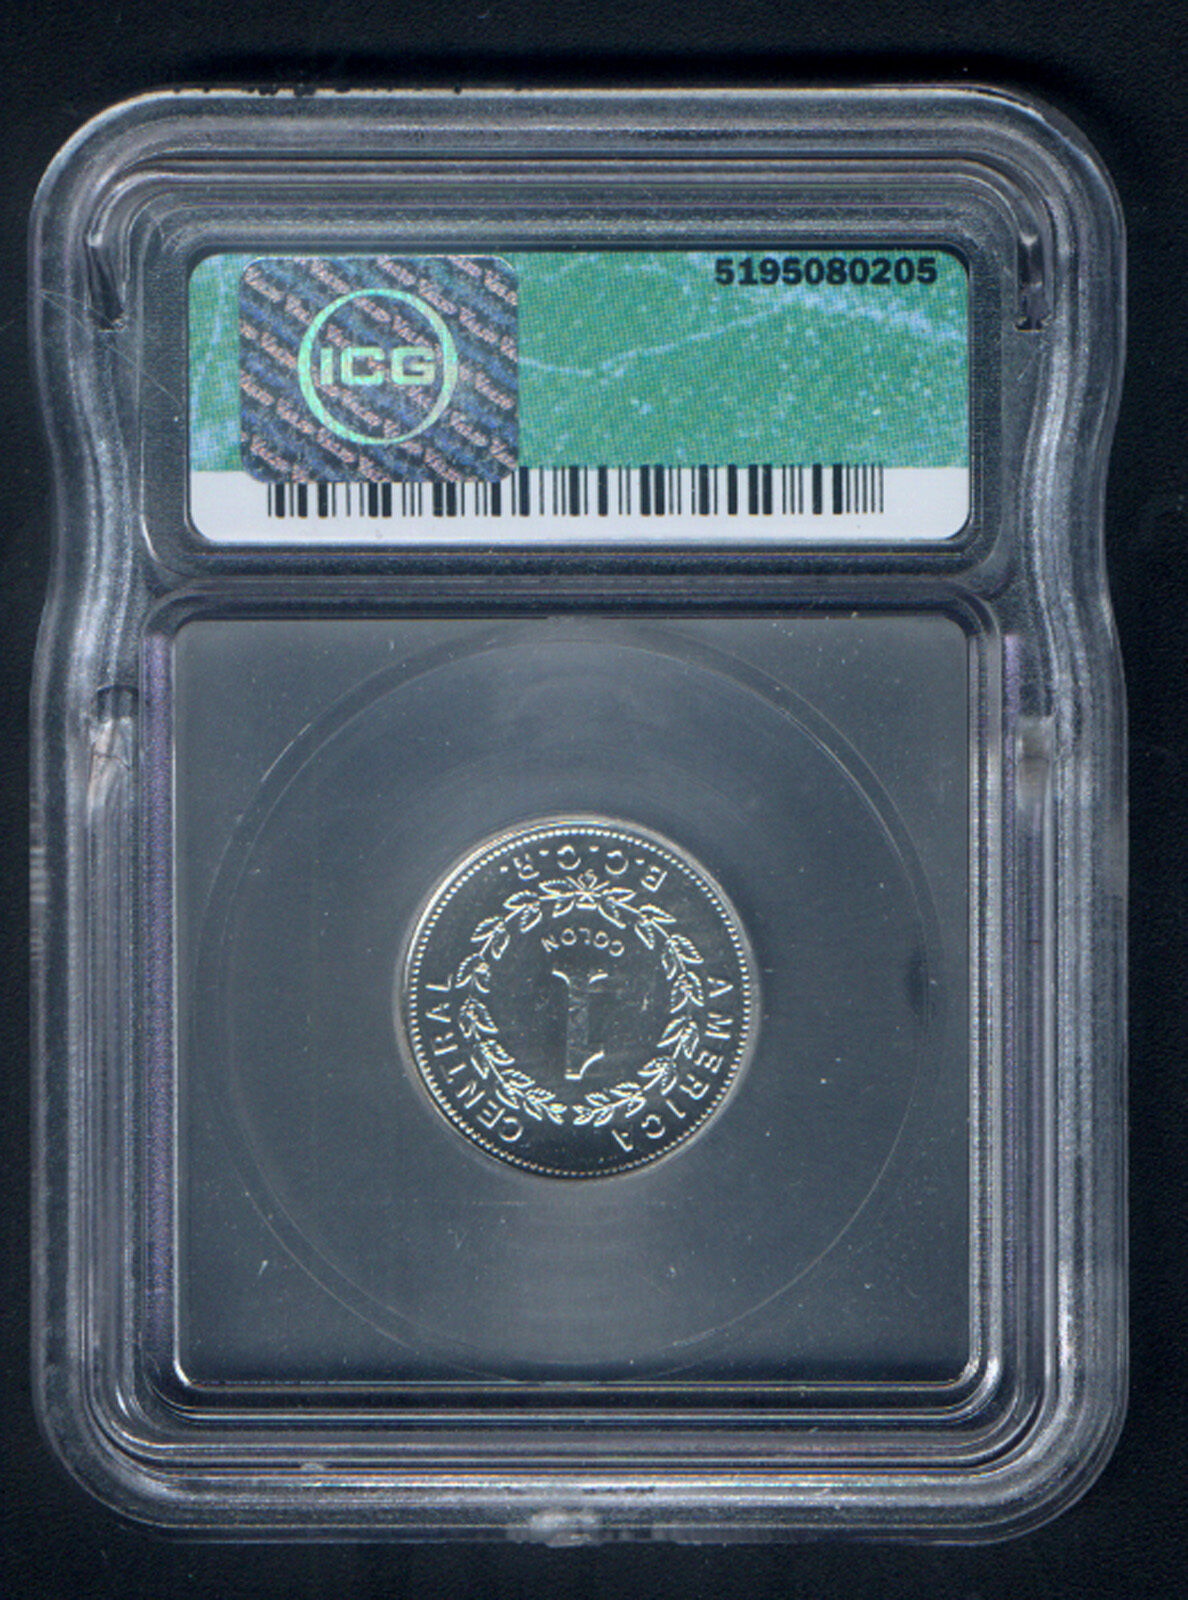 COSTA RICA 1993 ICG SLABBED & GRADED COLON as PROOFLIKE MINT STATE 65 KM # 210.2